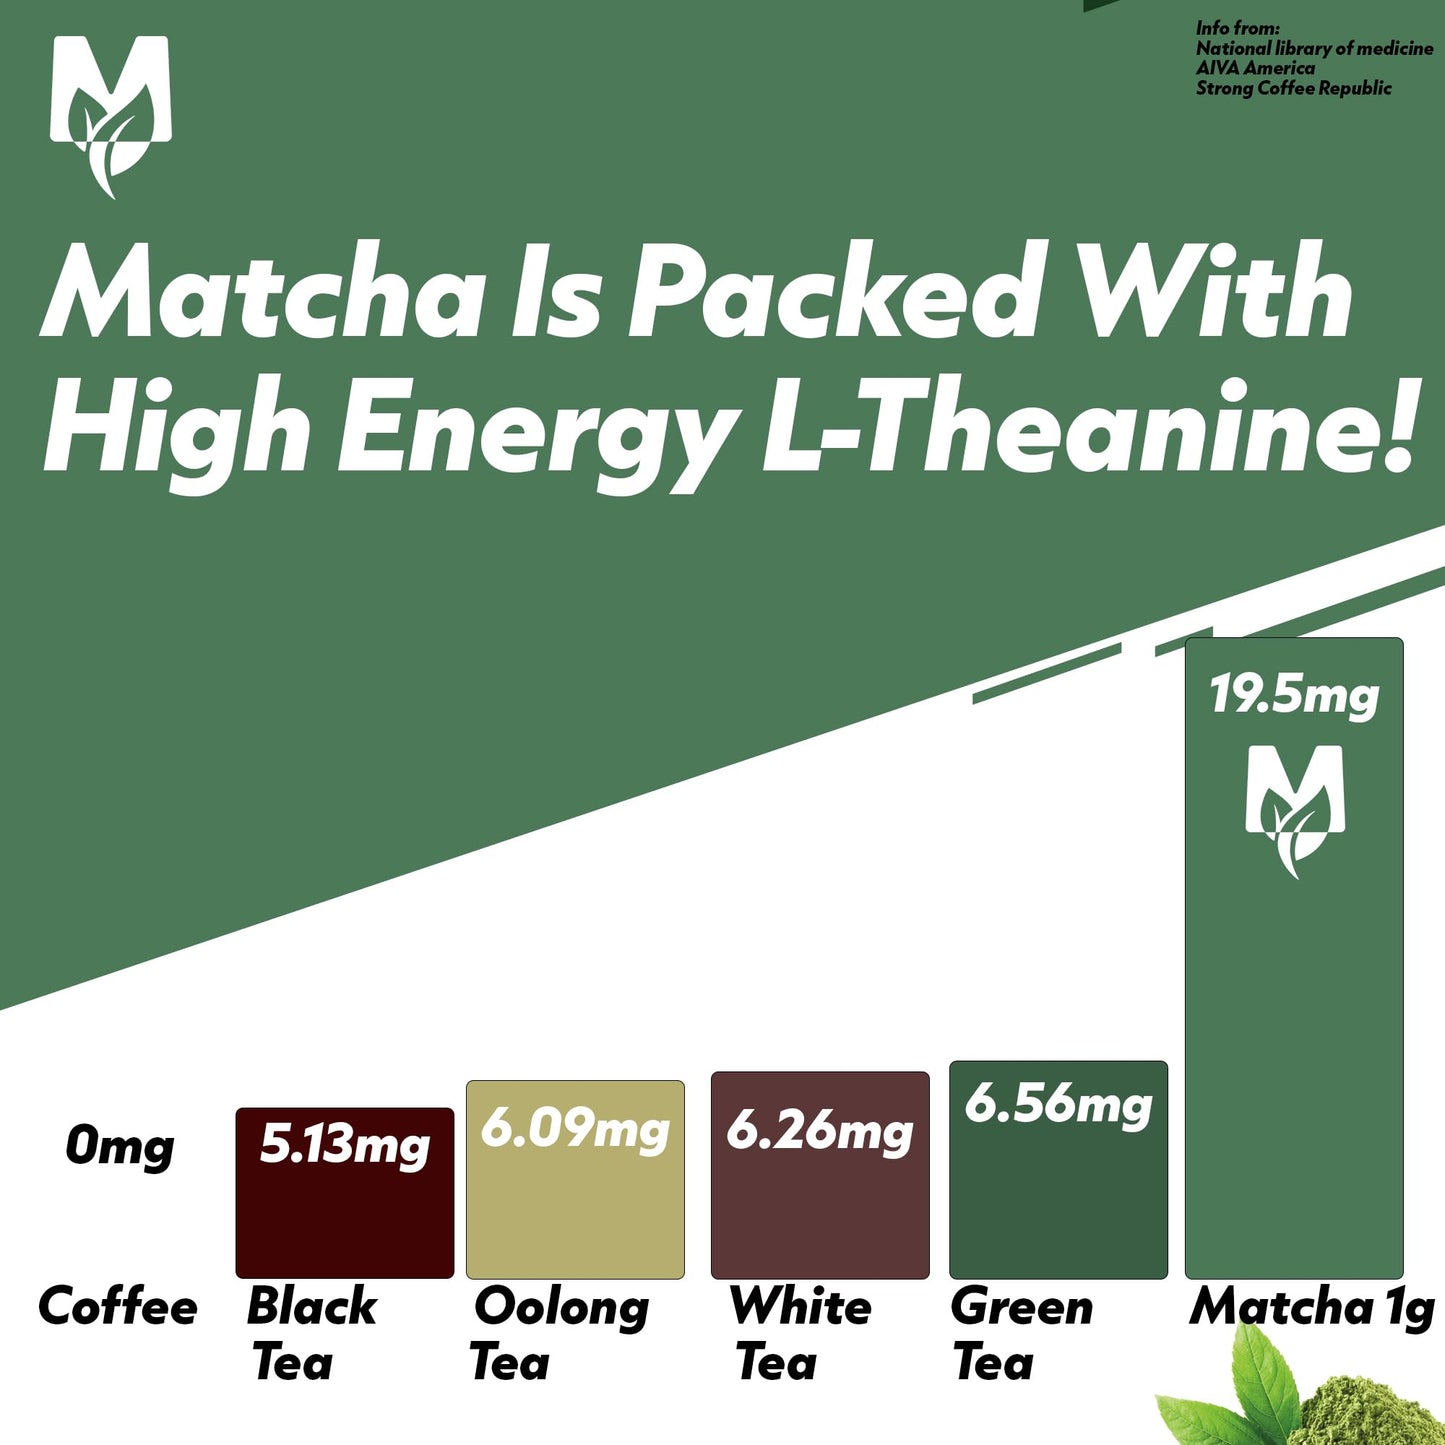 MAtcha is high in Ltheanine